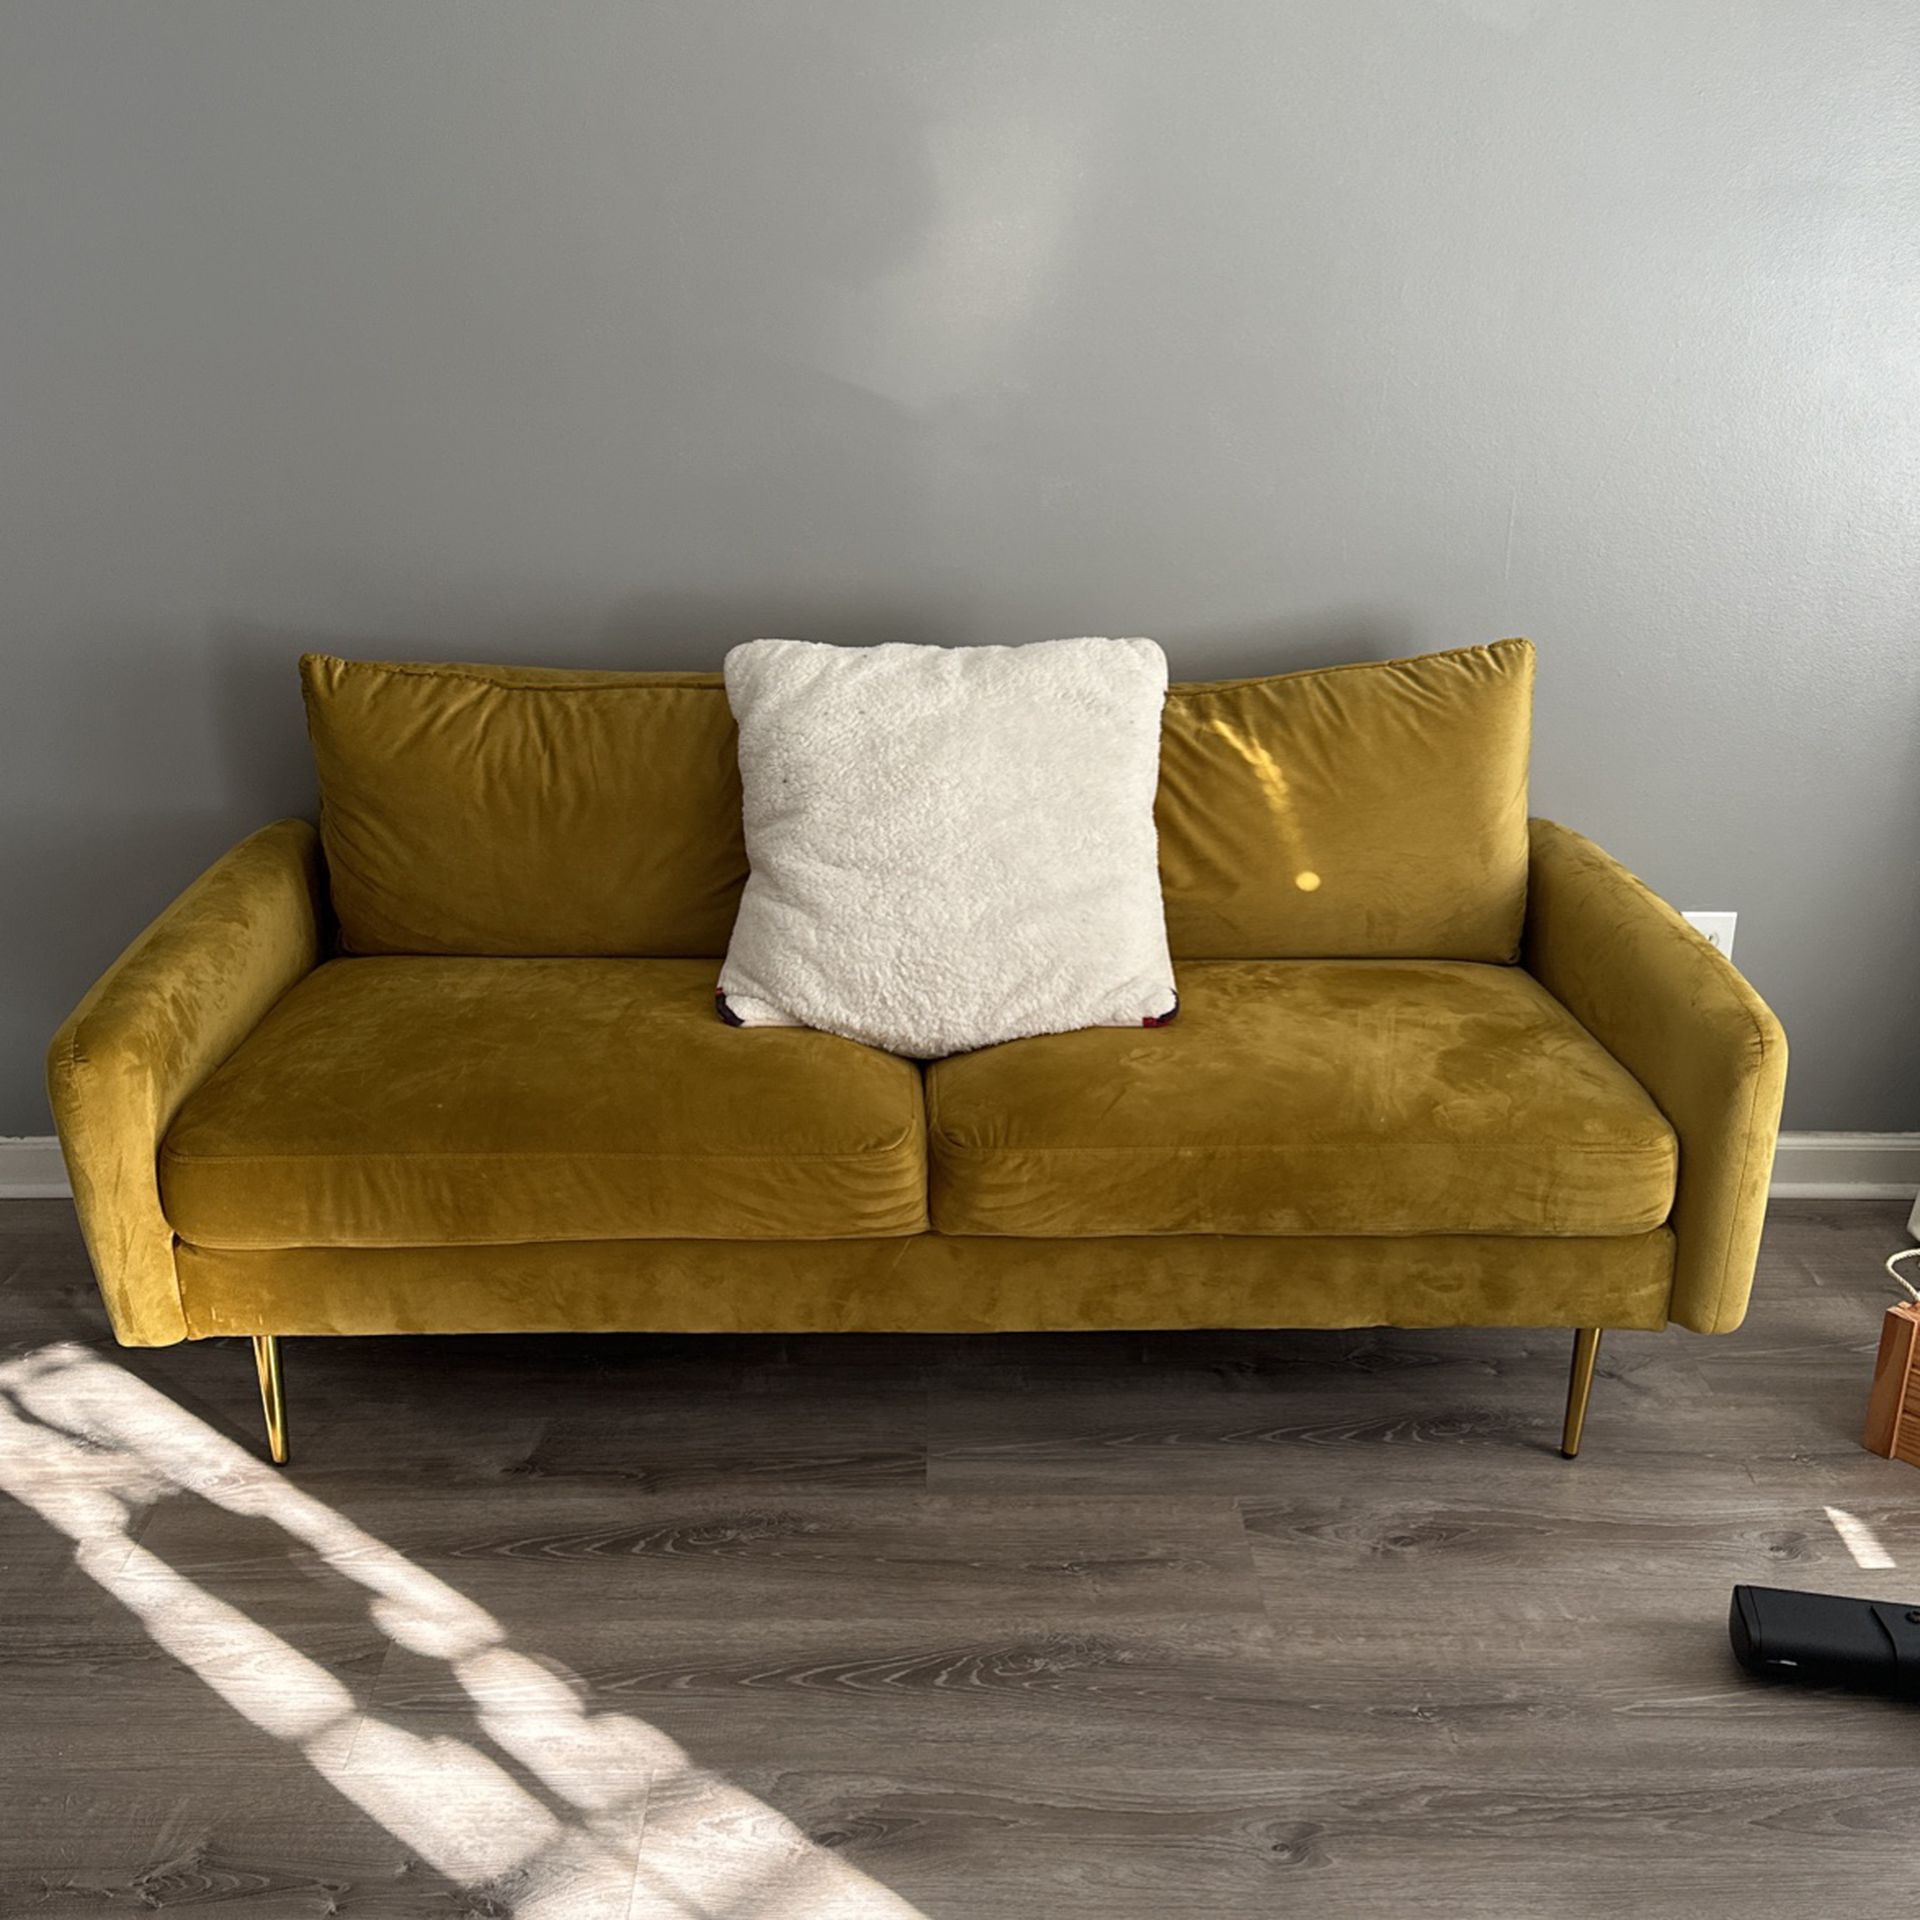 Golden Couch / Yellow Couch $200